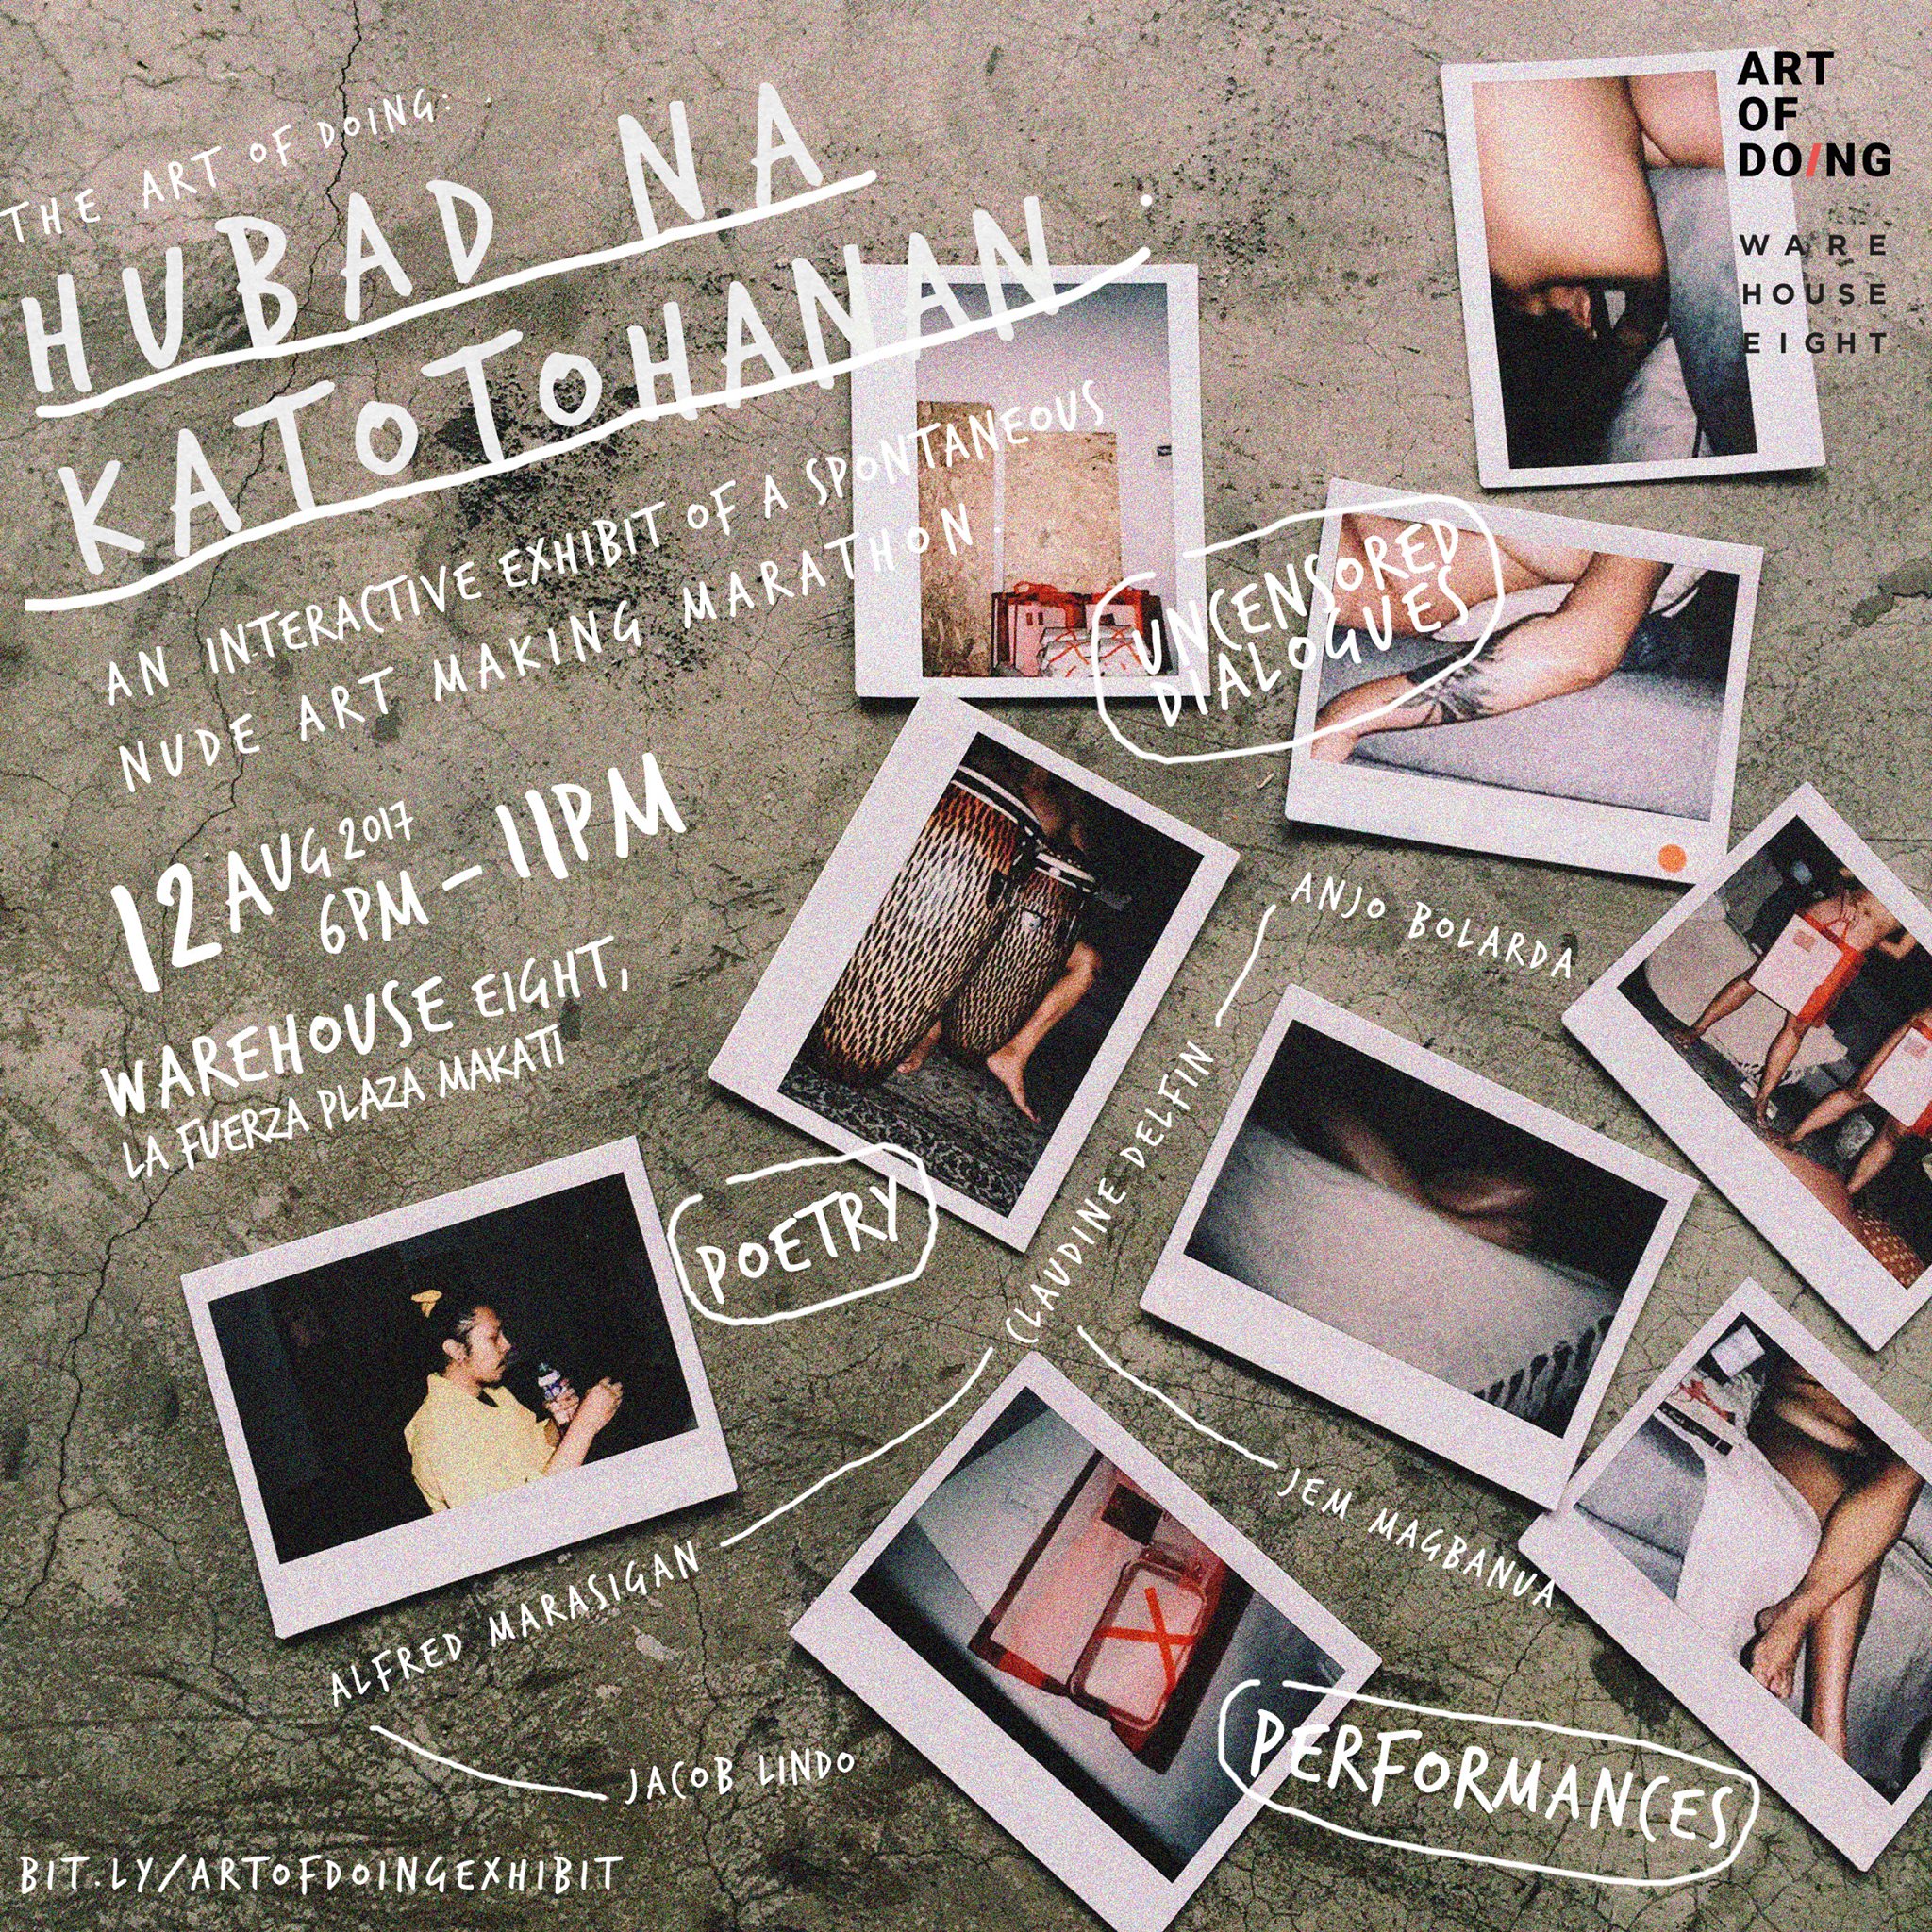 AUG 12 Hubad Na Katotohanan Exhibit by The Art of Doing Public · Hosted by Warehouse Eight and Art of Doing PH Going clock Saturday, August 12 at 4 PM - 11 PM 2 days ago pin Show Map Warehouse Eight 2241 Don Chino Roces Ave. Warehouse 8-B, 1231 Makati About Discussion 307 Went · 2.7K InterestedSee All April Mae, Lex and 5 other friends went Details "Hubad na Katotohanan" is the first initiative of ART OF DO/NG that aims to create a platform for genuine dialogues and connections. The exhibit will feature 200+ one-off nude portraits created from a collaborative one-day art sketching marathon with strangers and five carefully selected multidisciplinary artists. There will be uncensored poetry and dialogues about art. ART OF DO/NG is the practice of following your gut despite fear, to thrive in moments of pure passion. It's an interactive platform where art is more accessible, and the audience are deeply involved in the messy and often intimidating process of creation. It seeks to deepen art appreciation by letting the audience learn by doing. AOD celebrates multidisciplinary forms of expression and focus on the creative experience and on engaging the community rather than the output. Featured Artists: Jem Magbanua Jacob Lindo Alfred Marasigan Anjo Bolarda Claudine Delfin (No Entrance Fee) ALL ARTWORKS COSTS 2,500 ONLY Venue: Warehouse Eight, La Fuerza Plaza, 2241 Chino Roces Ave., Makati 1231 6:00-11:00pm Free Admission Art exhibition Drawing Poetry